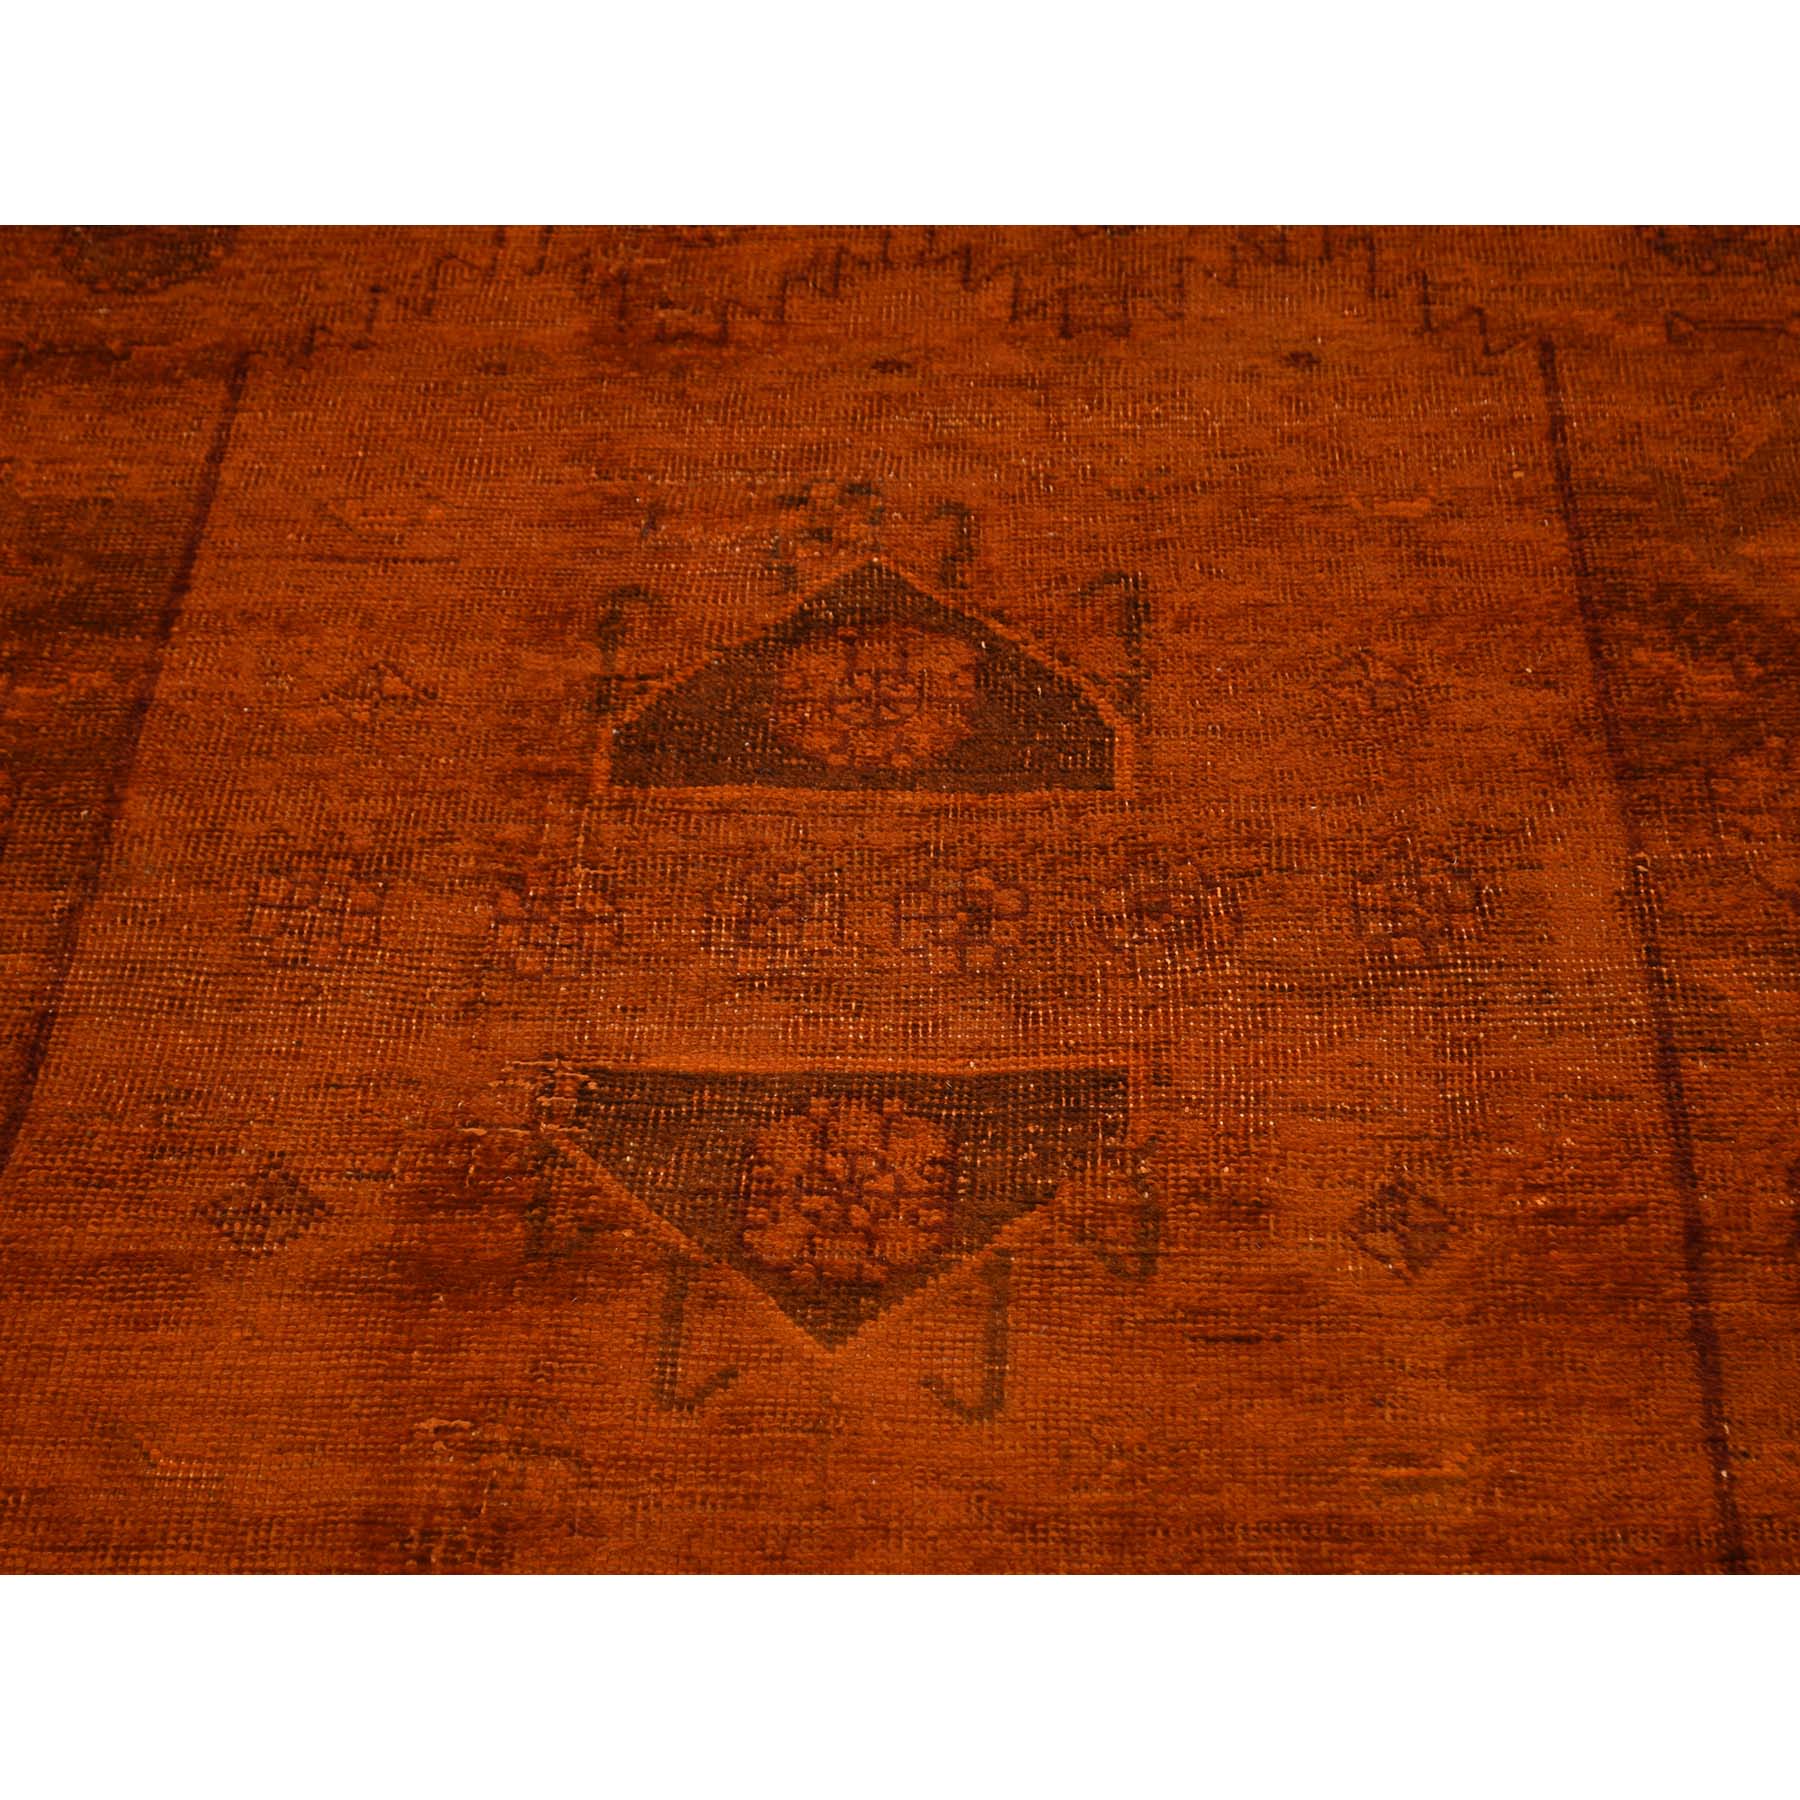 4-8 x9- Shiraz Overdyed Hand-Knotted Worn Wool Persian Wide Runner Rug 